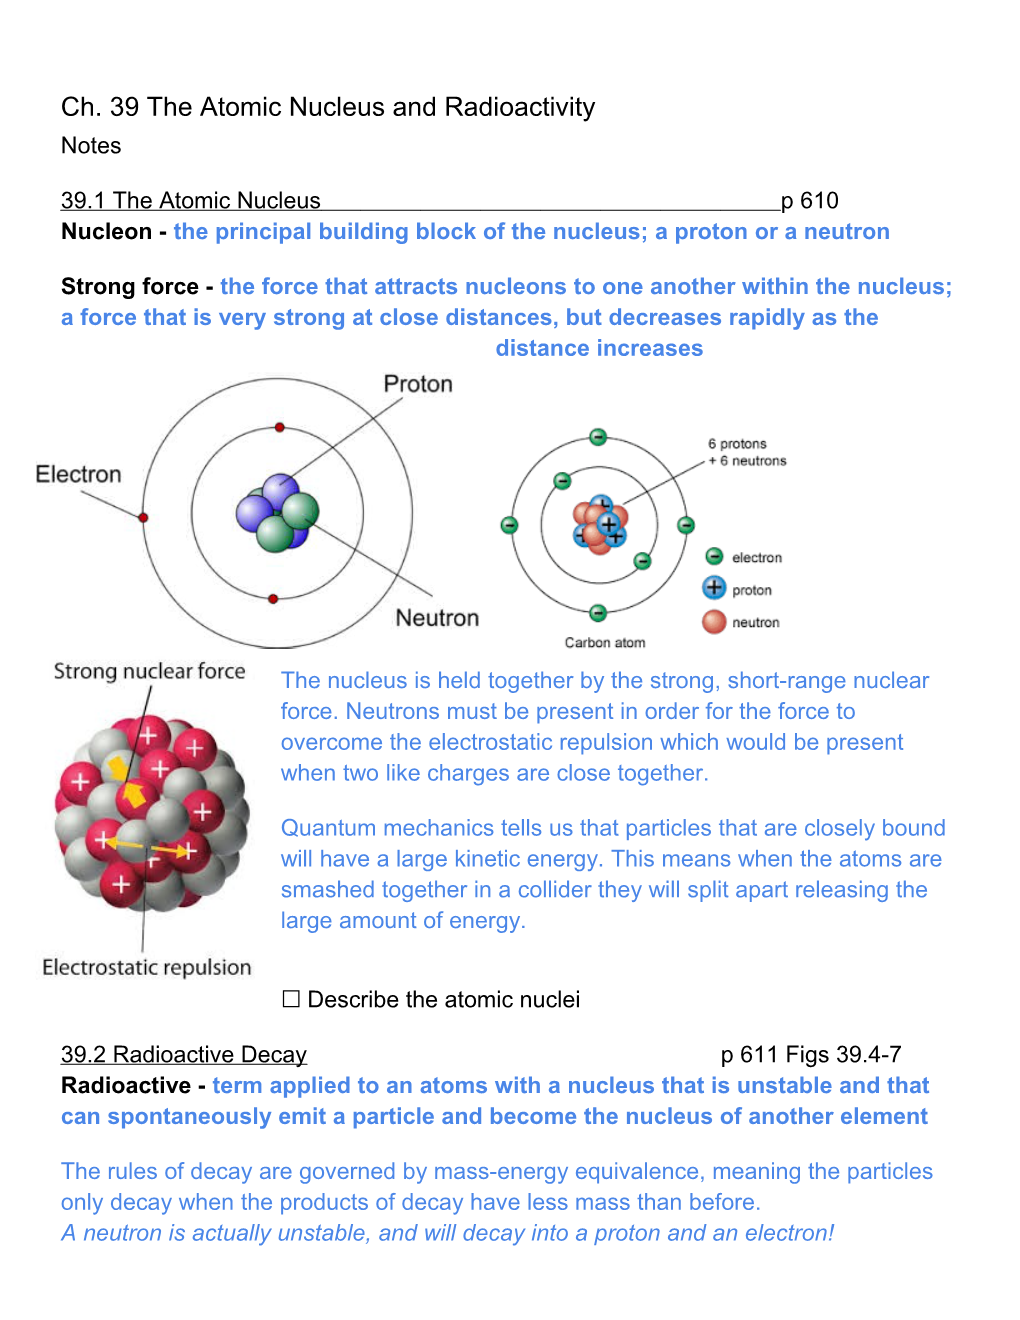 Ch. 39 the Atomic Nucleus and Radioactivity